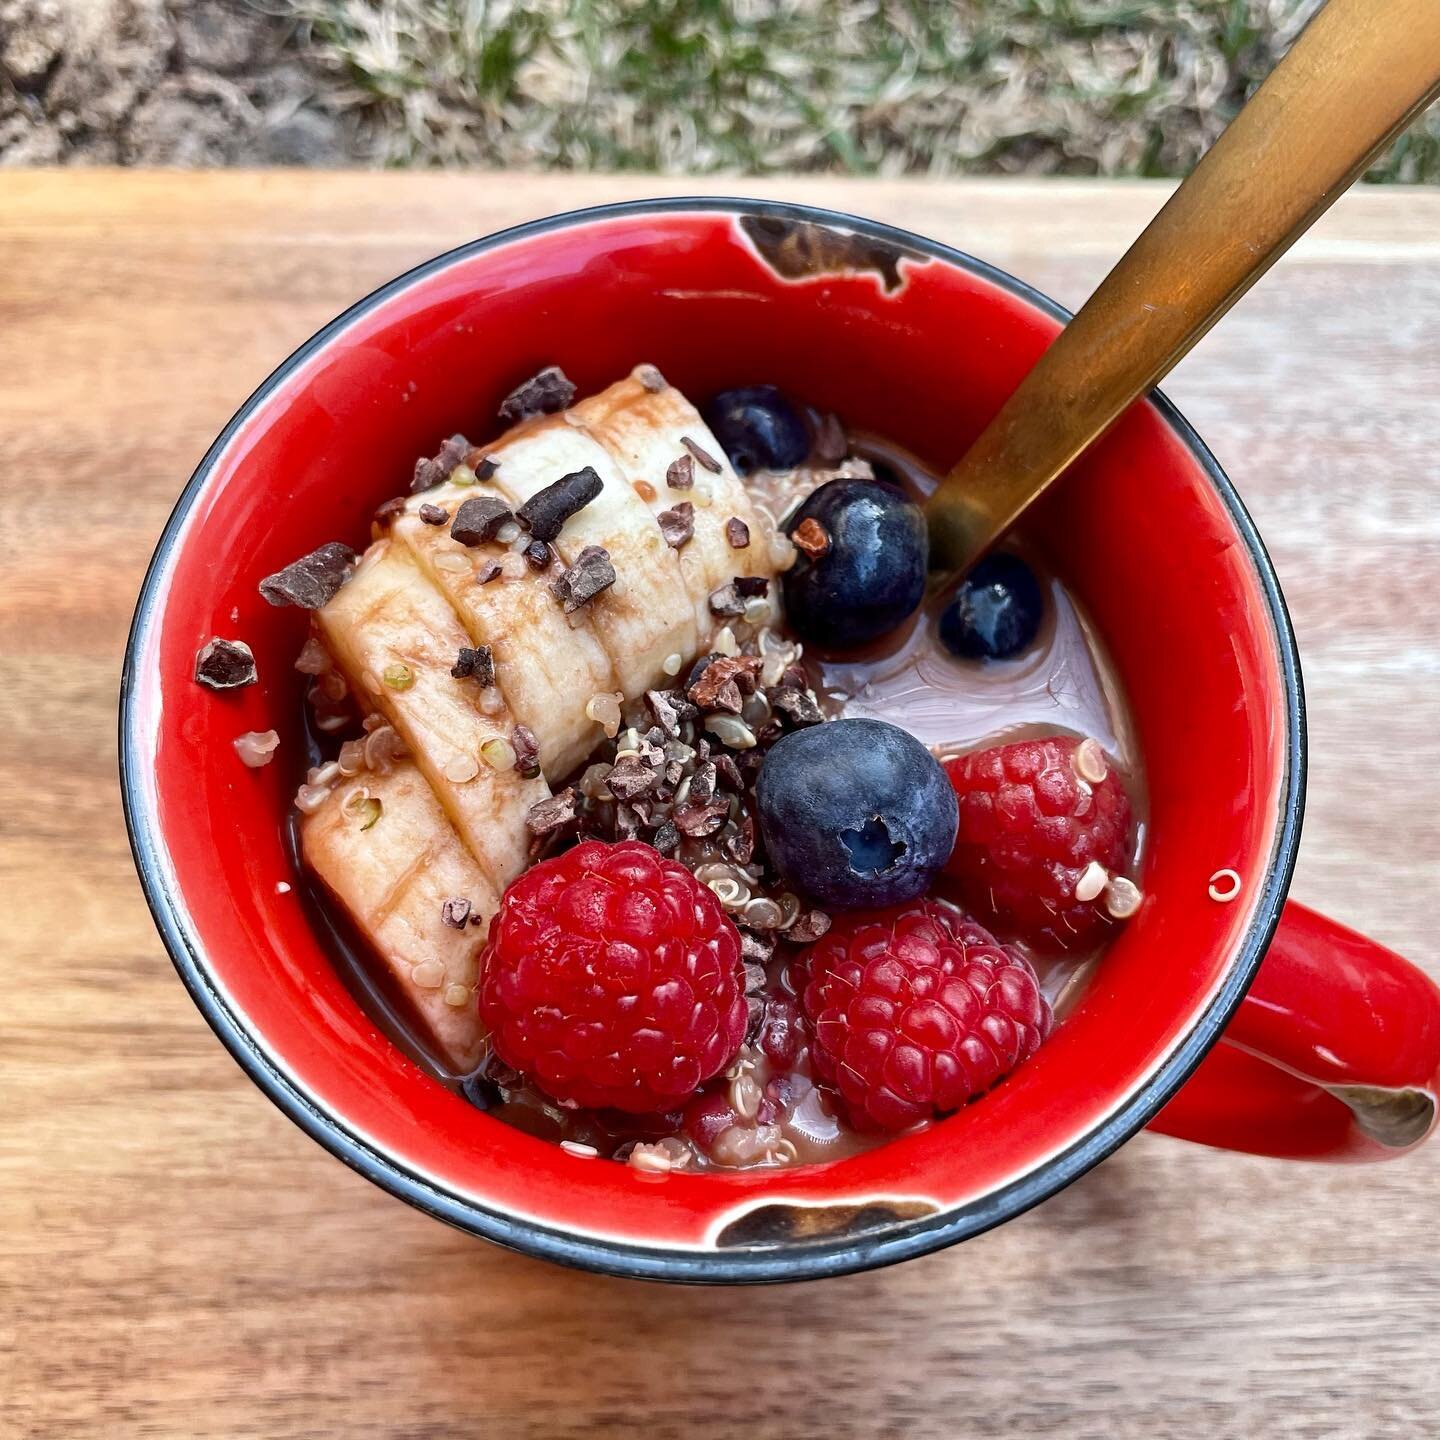 ⚡️Friday Fuel ⚡️Chocolate Quinoa Breakfast Bowl (or mug!)

Chocolate and quinoa pair up in this easy to make dish that can be eaten for breakfast or as a post-ride meal.

3/4 - 1 cup cooked quinoa
2/3 - 3/4 cup milk of choice (I used flax milk)
1 Tbs